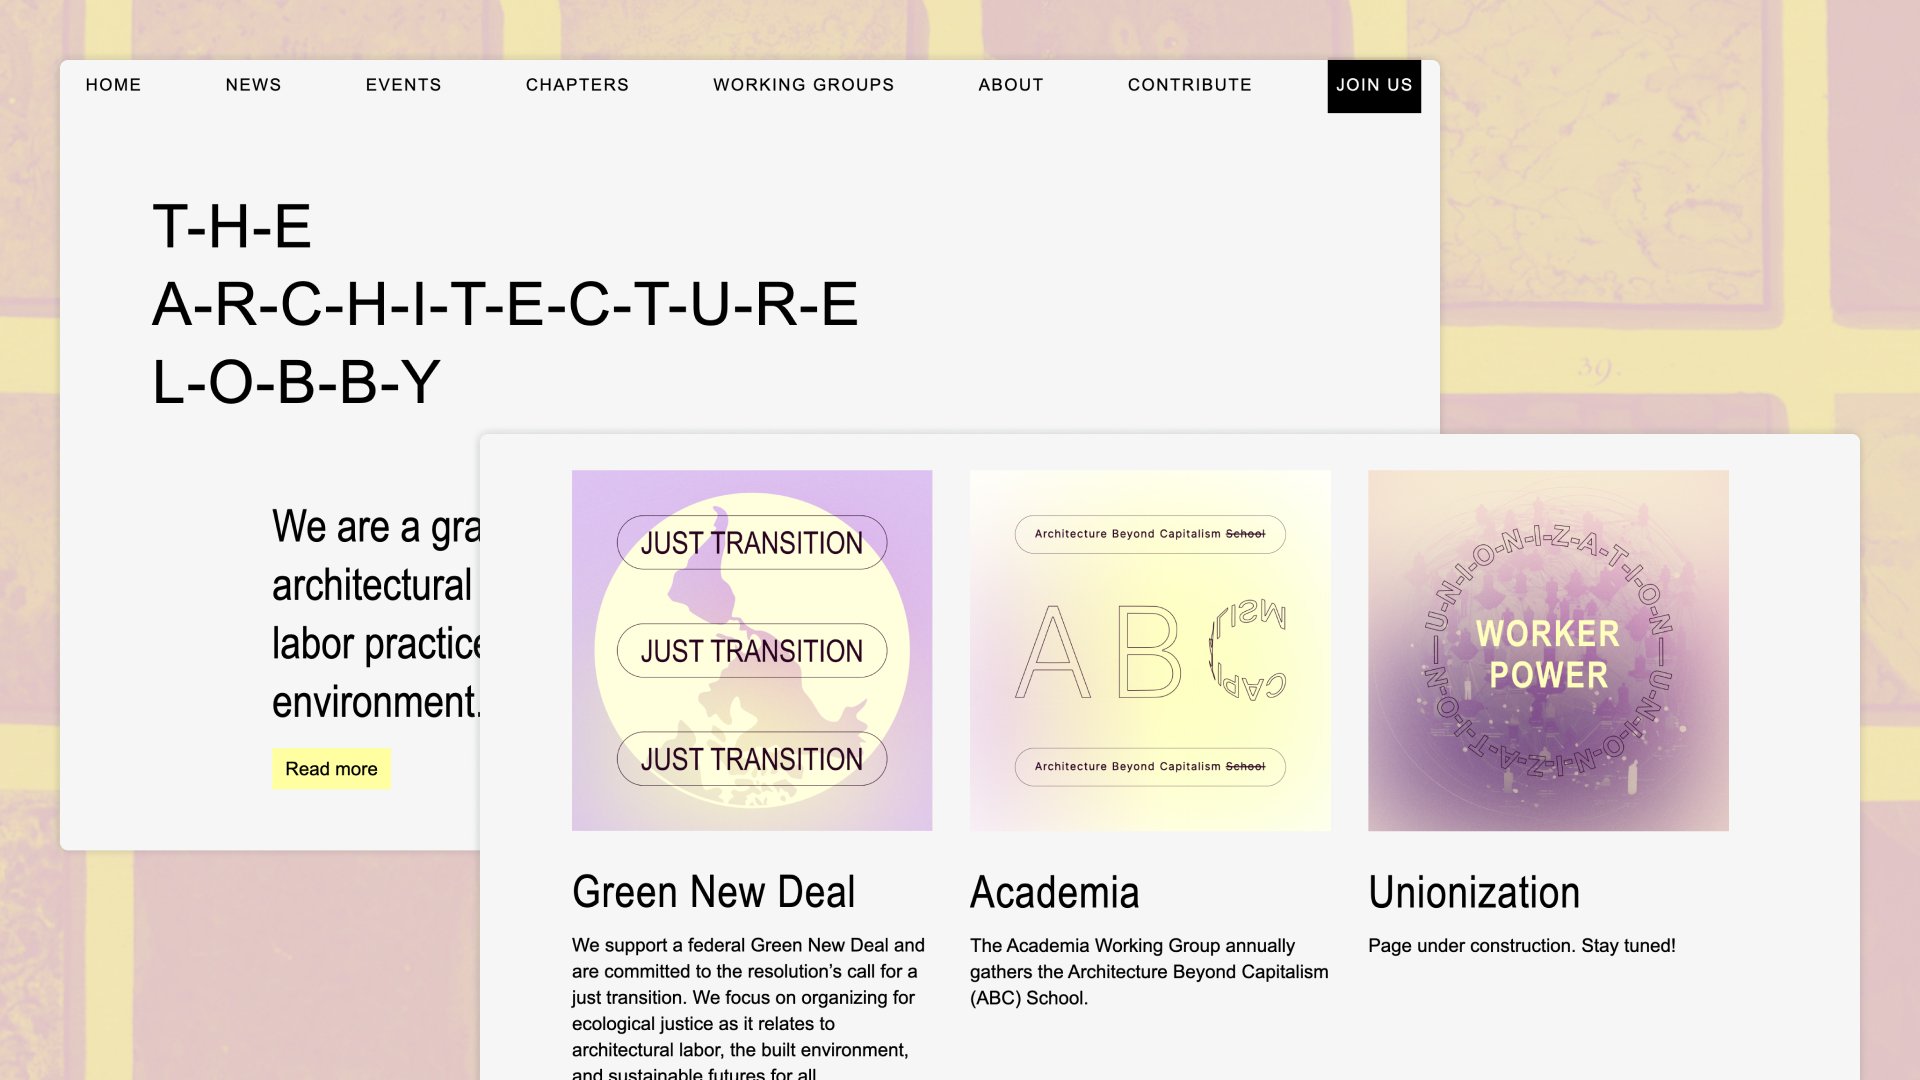 Screenshots of the Architecture Lobby homepage